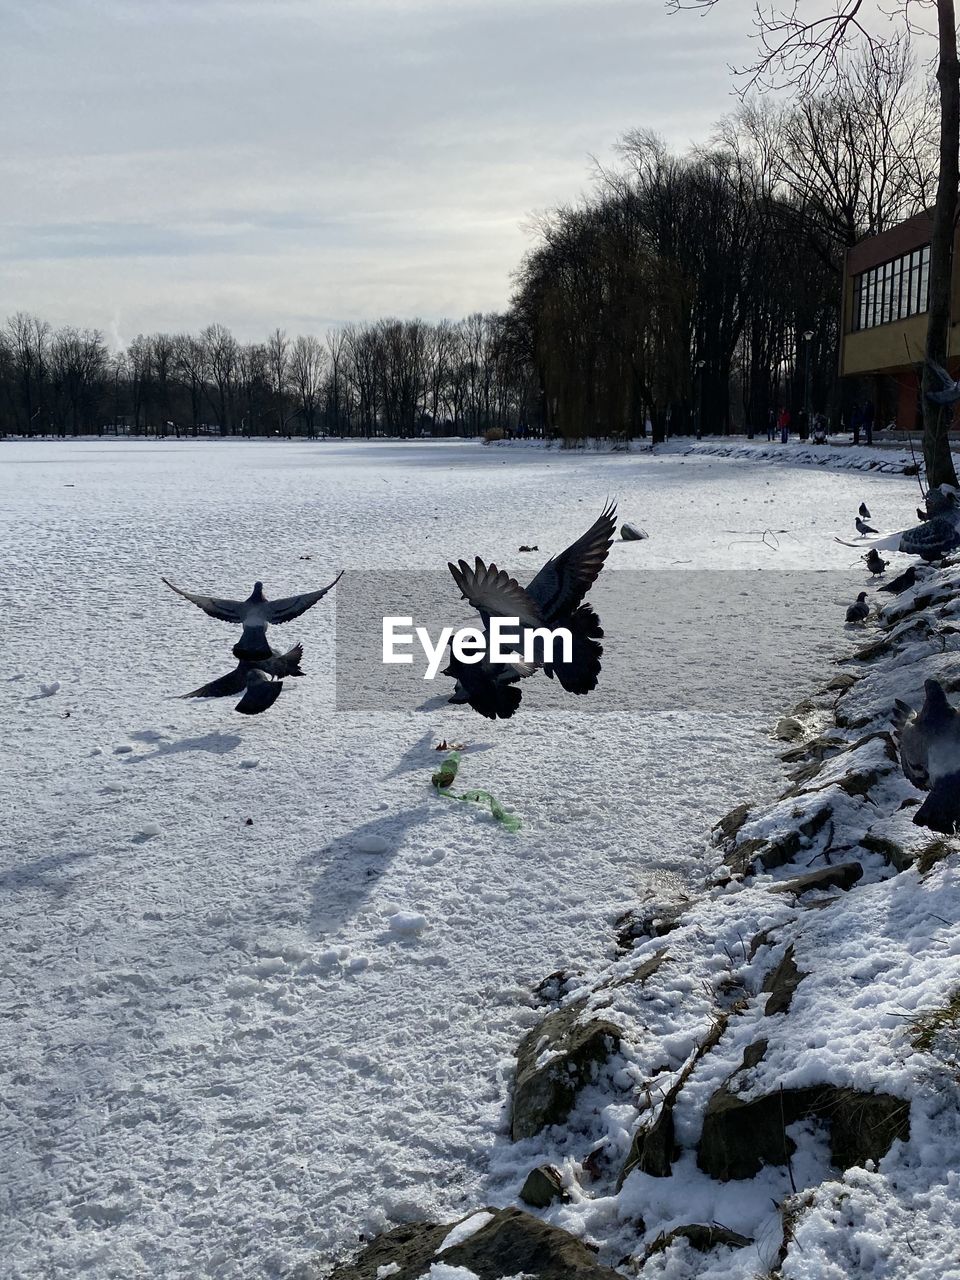 VIEW OF BIRDS IN SNOW